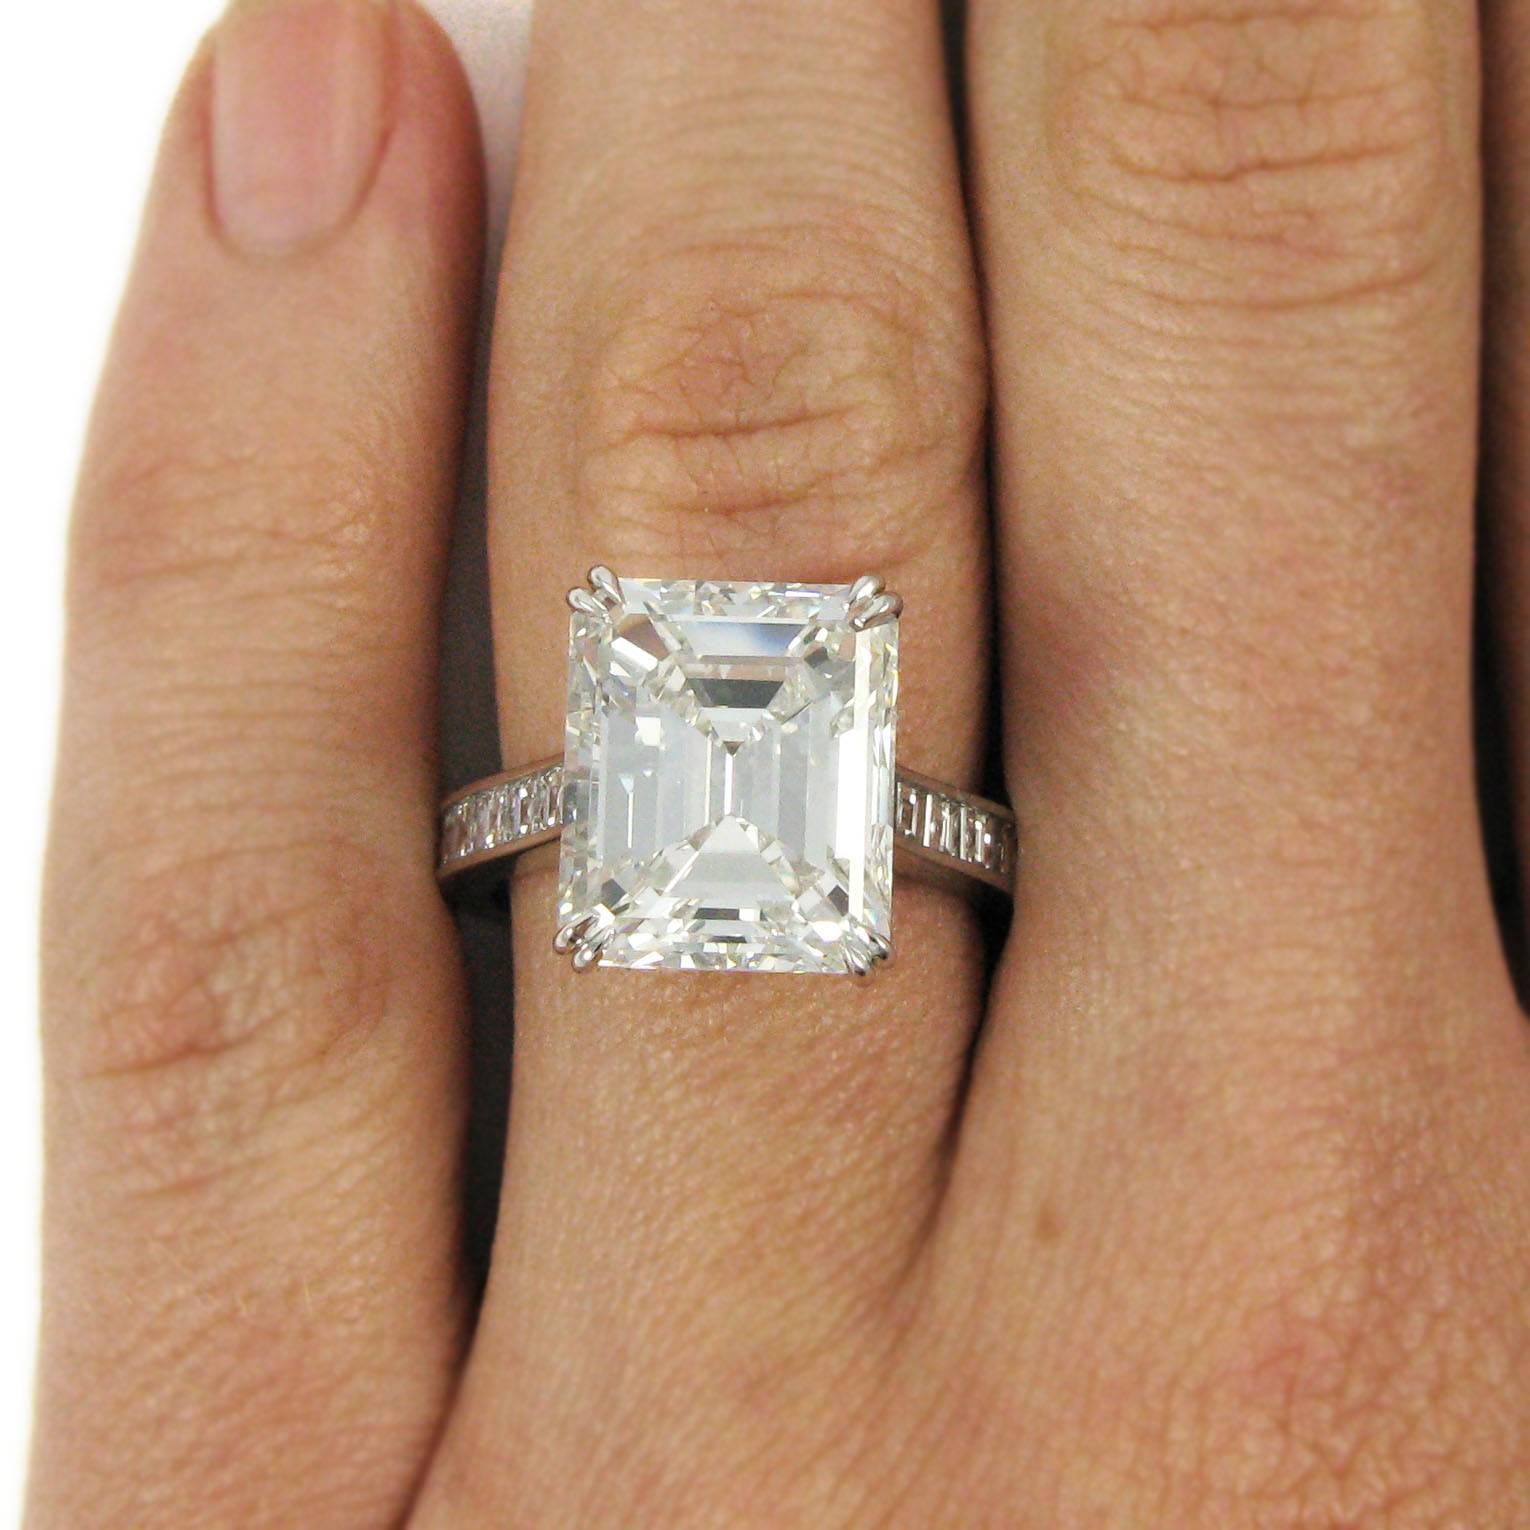 A stunning update to the classic solitaire. This platinum ring features a beautiful 7.18 carat emerald-cut diamond with F color and VS2 clarity. The diamond is set in a simple double-claw basket and is mounted on a streamlined cathedral ring shank